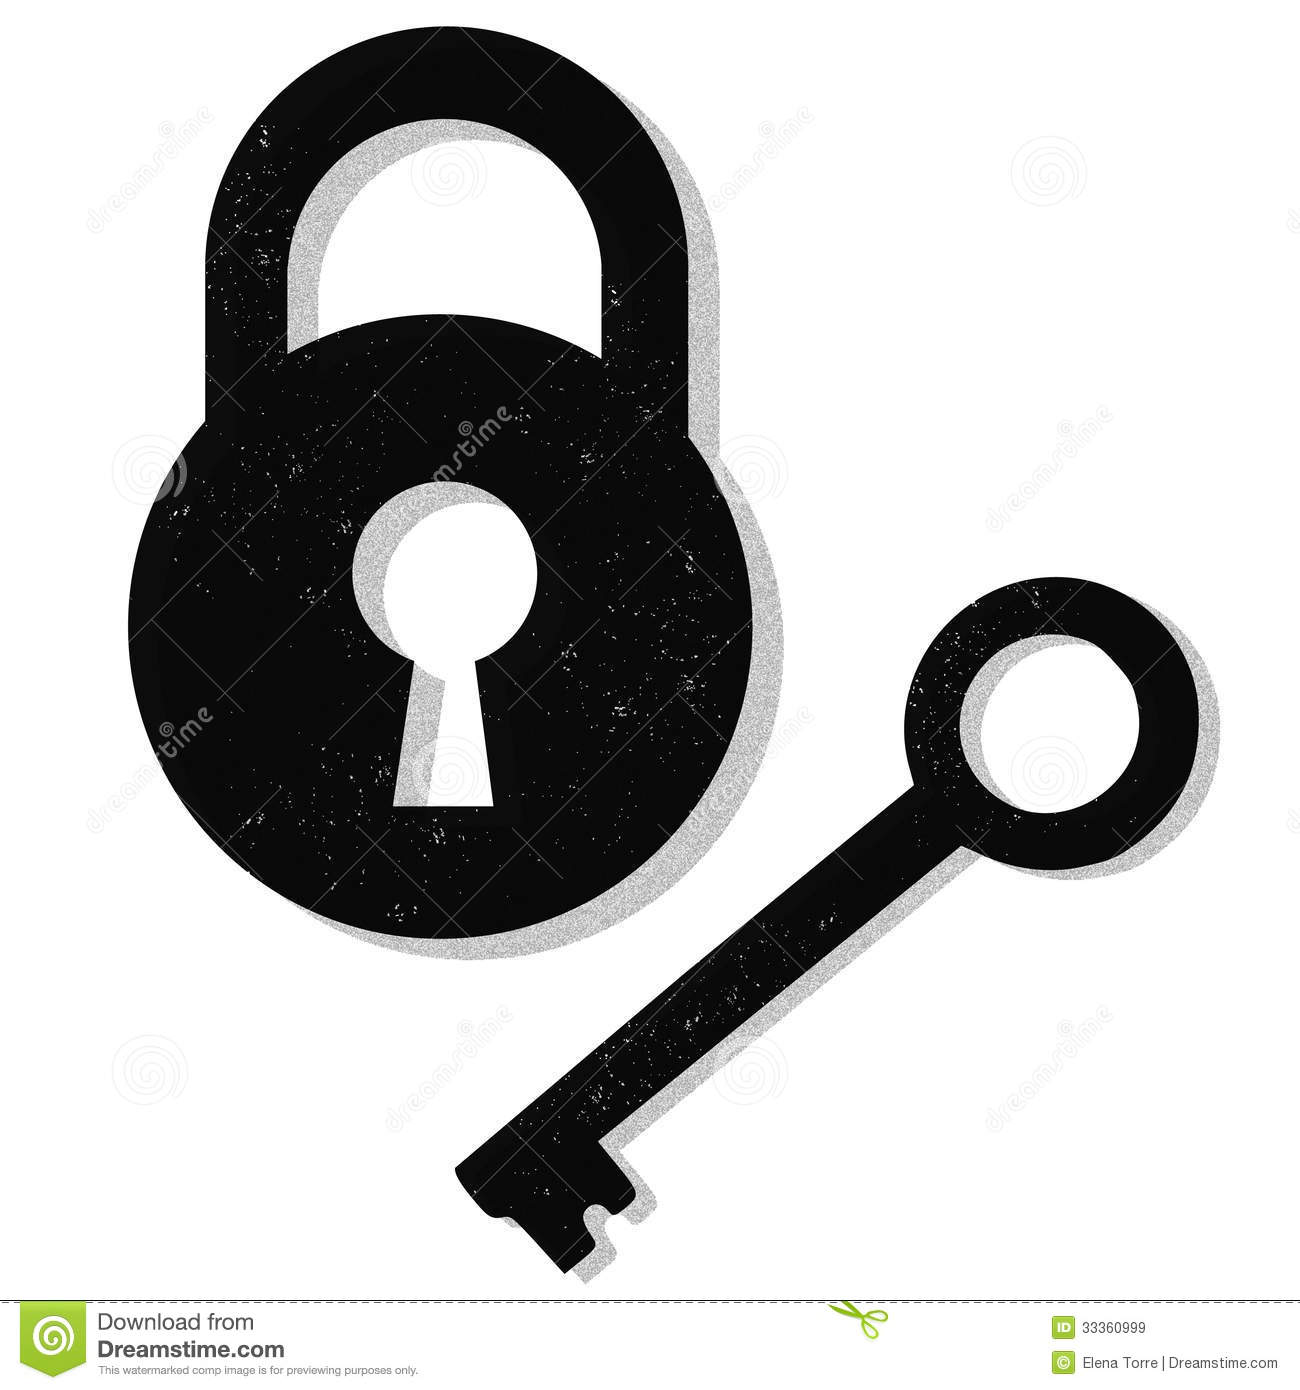 Illustration Of A Lock And Key Isolated On White Background